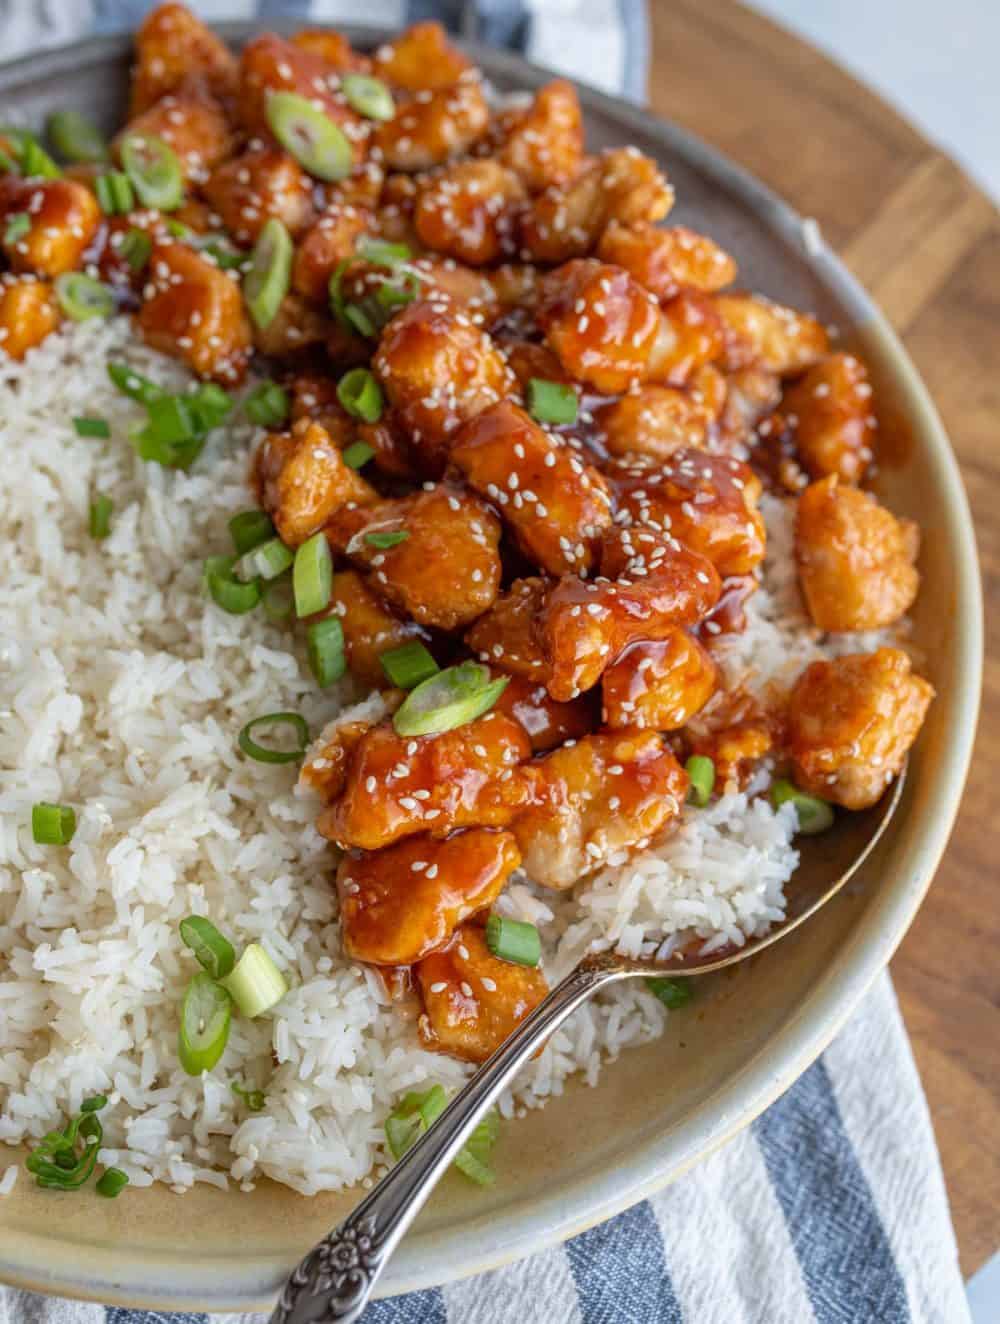 Delicious looking bowl of sesame chicken over steamed rice.